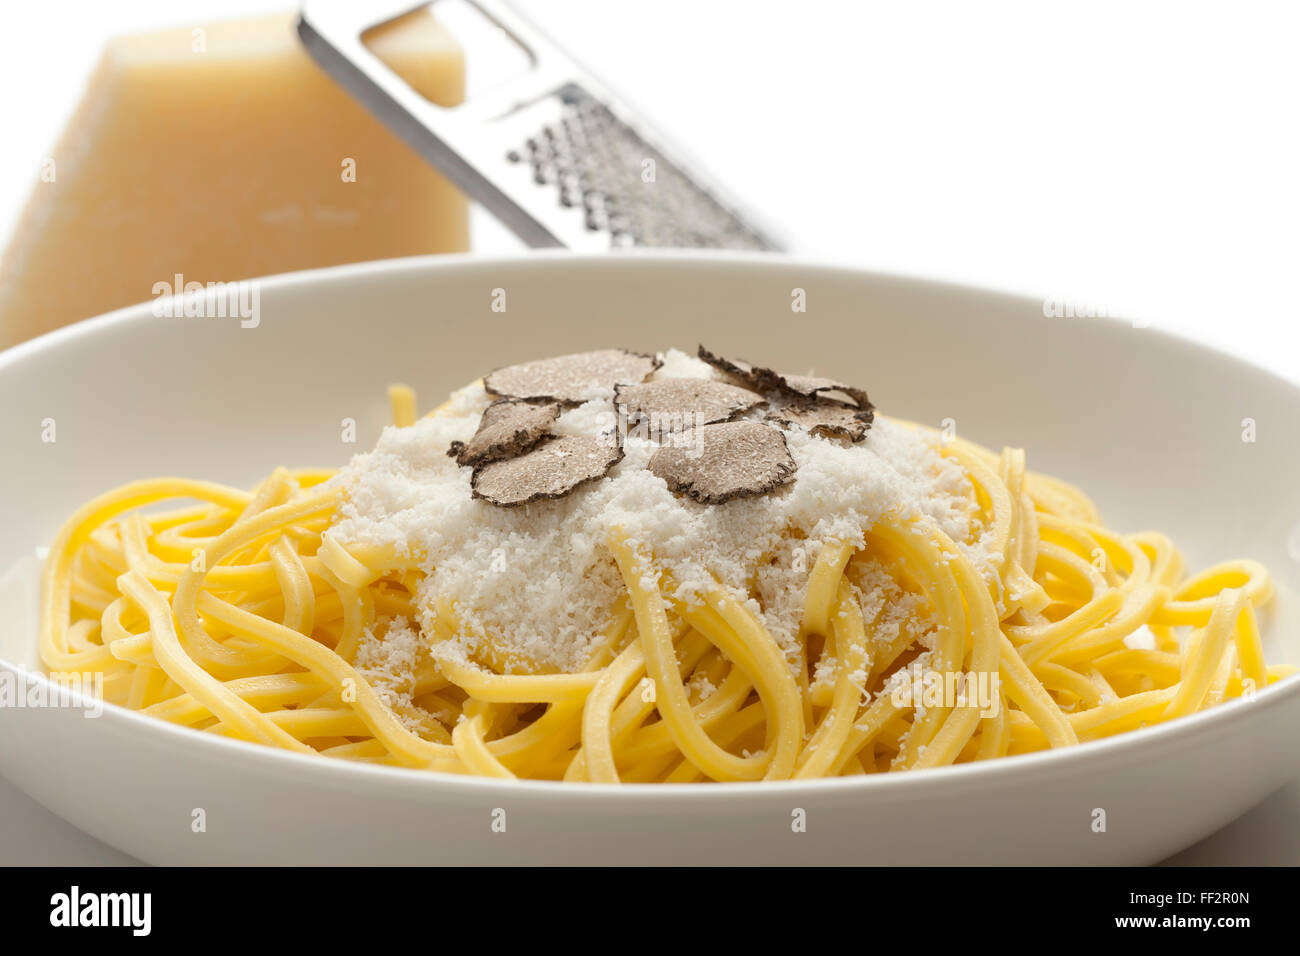 Spaghetti with black winter truffle and Parmesan cheese on a dish Stock Photo